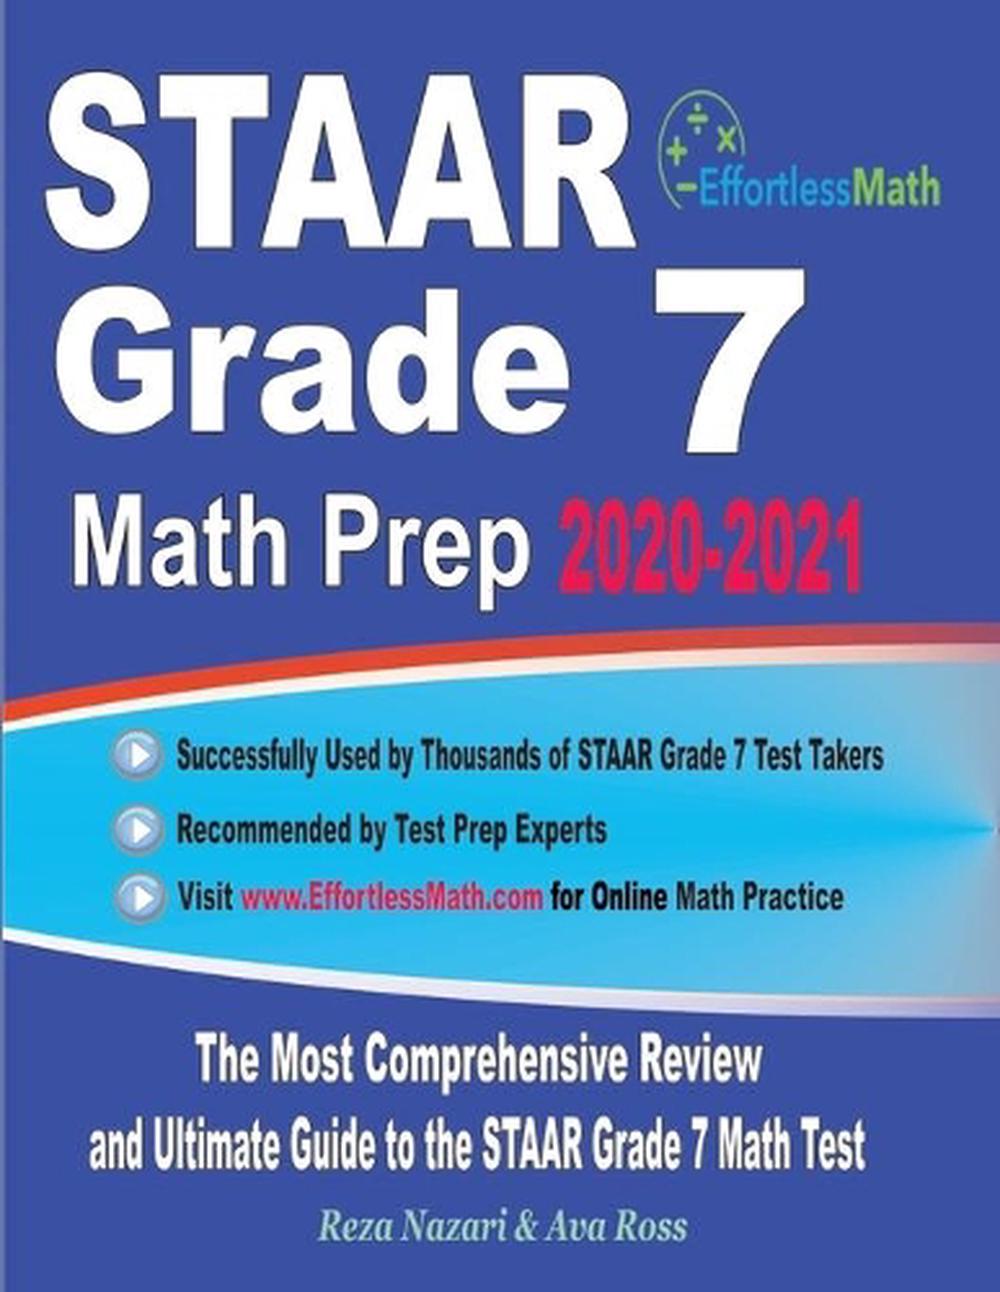 staar-eoc-2021-algebra-1-to-solve-the-equation-substitute-10-as-the-value-of-x-such-that-f